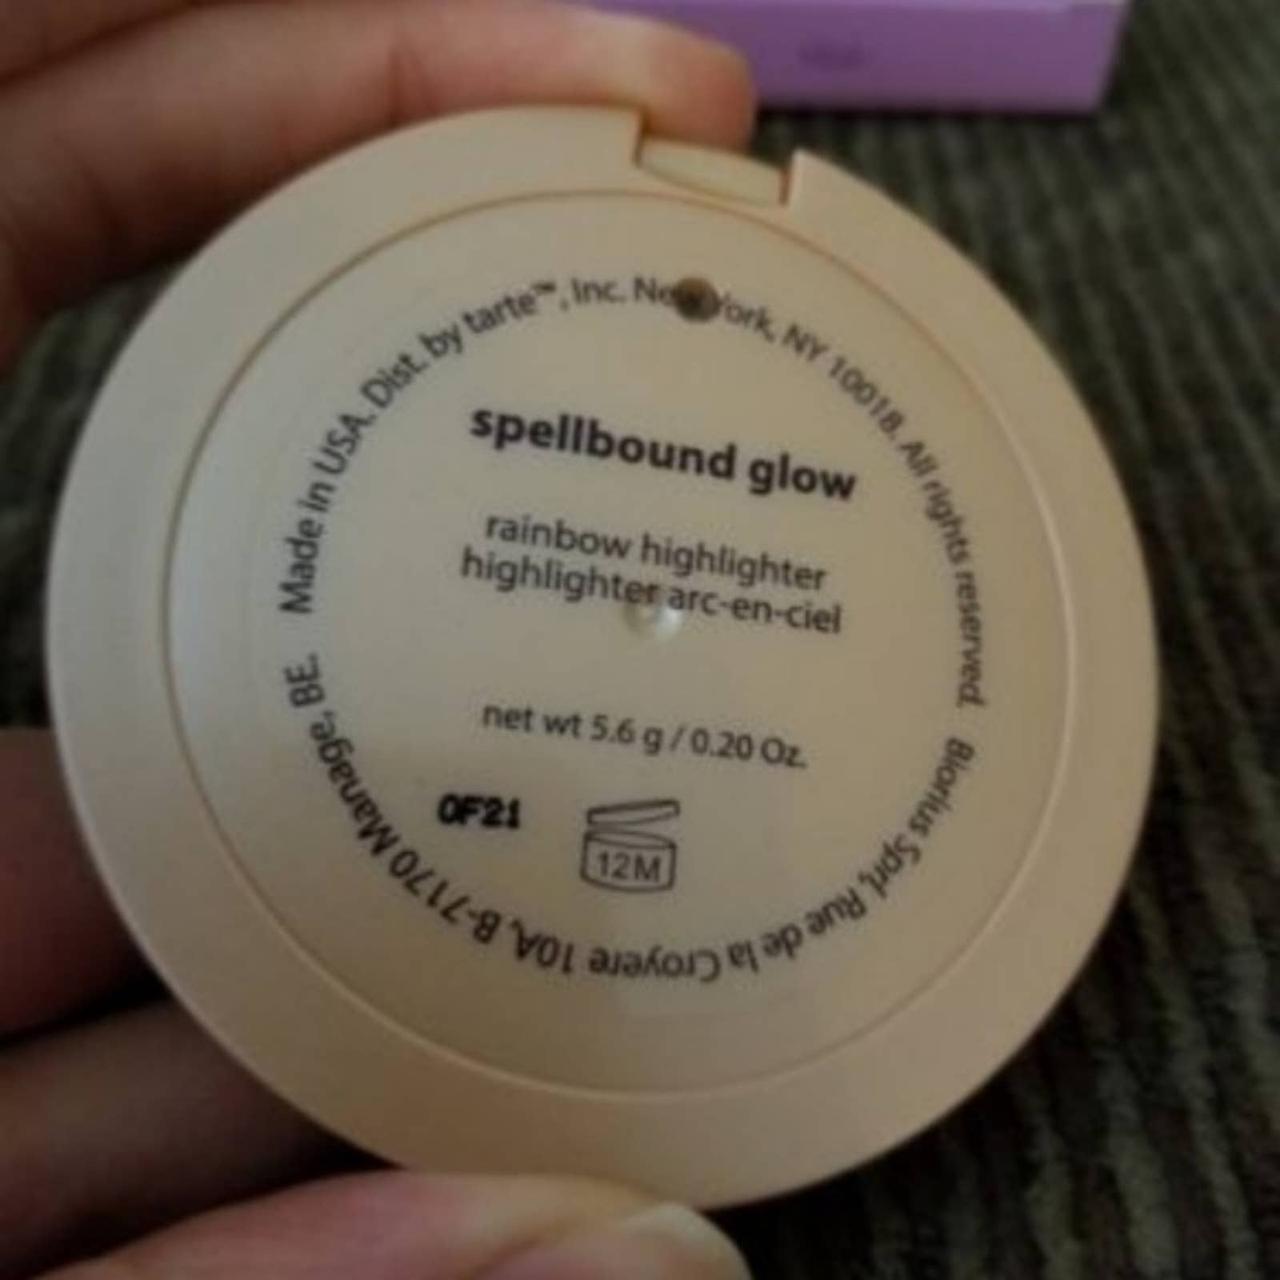 Product Image 4 - TARTE Rainbow Highlighter Spellbound Glow.

Never